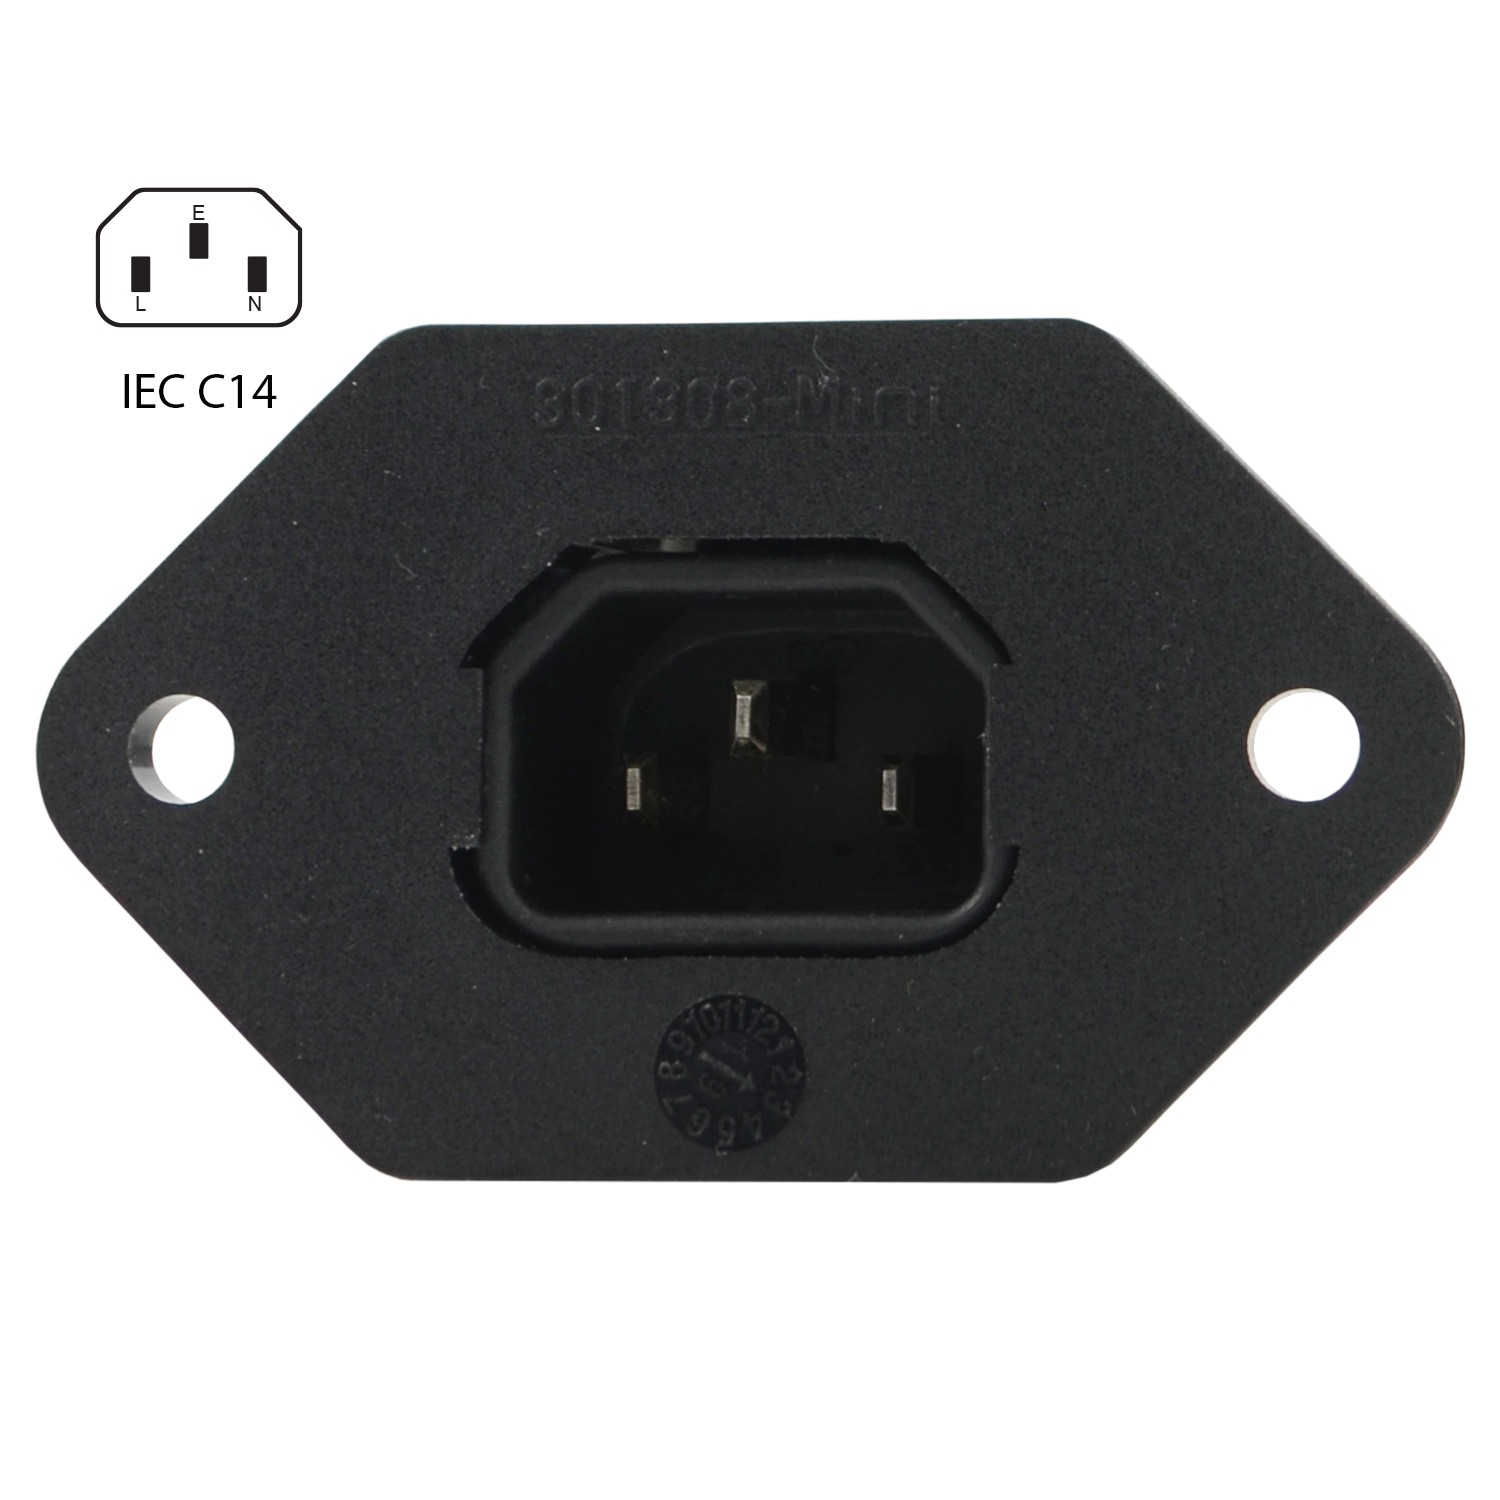 Iec C14 Inlet Pinout C14 to 5 15r Mountable Mini Adapter